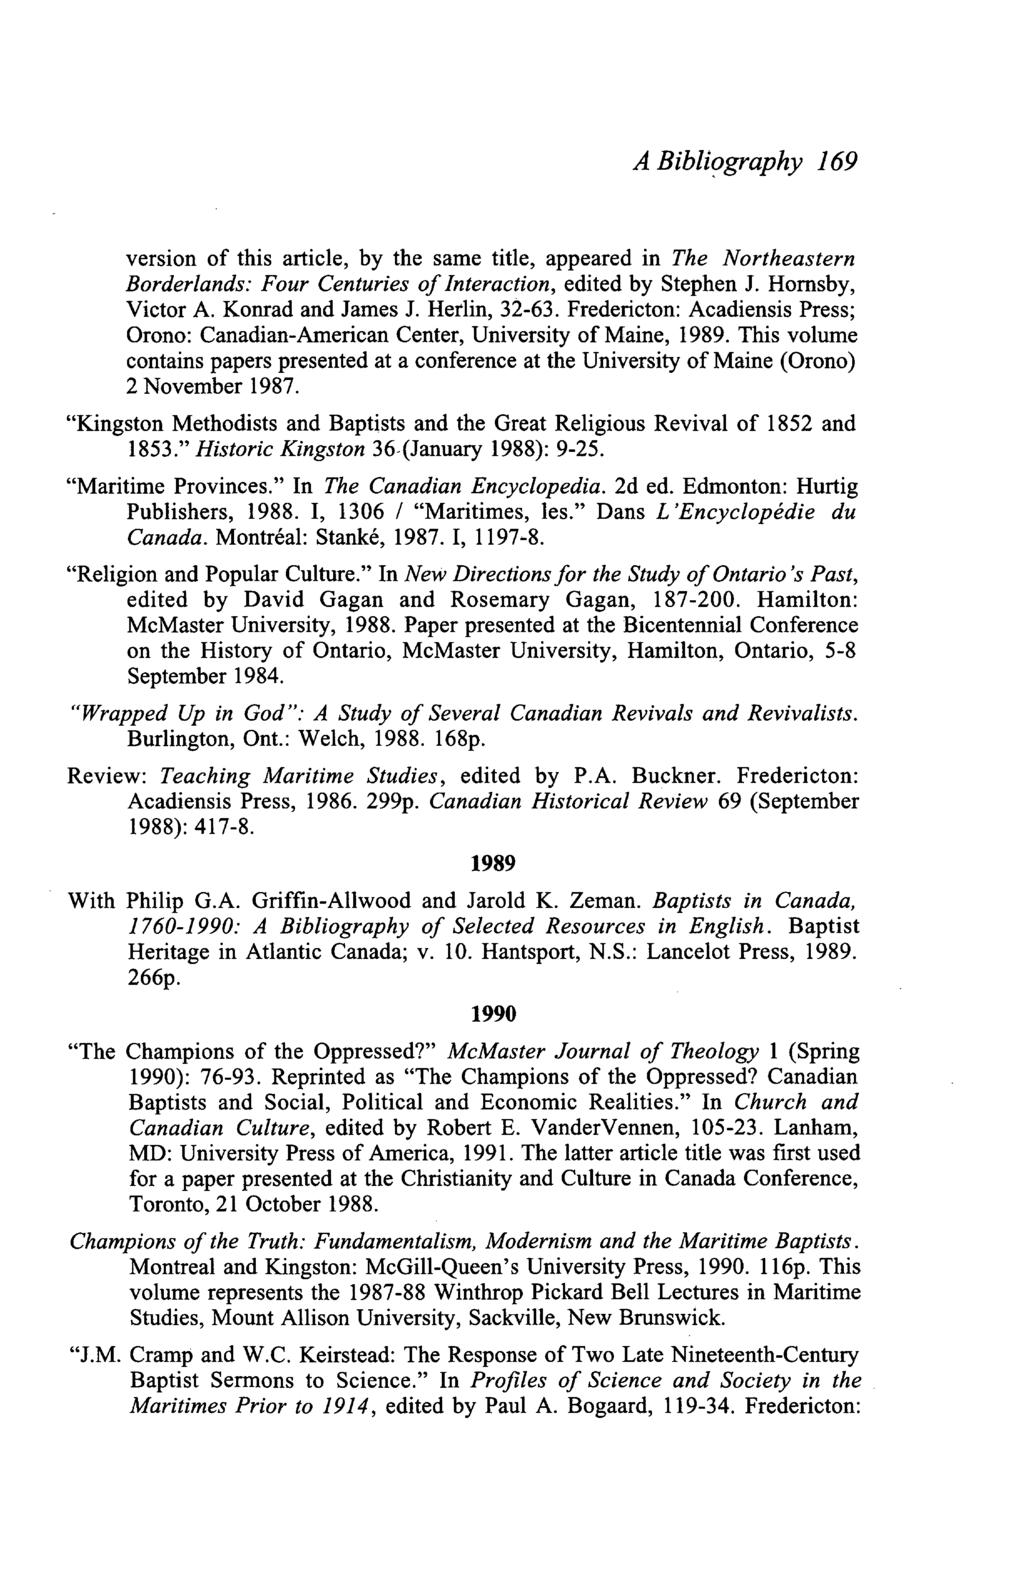 A Bibliography 169 version of this article, by the same title, appeared in The Northeastern Borderlands: Four Centuries of Interaction, edited by Stephen J. Hornsby, Victor A. Konrad and James J.